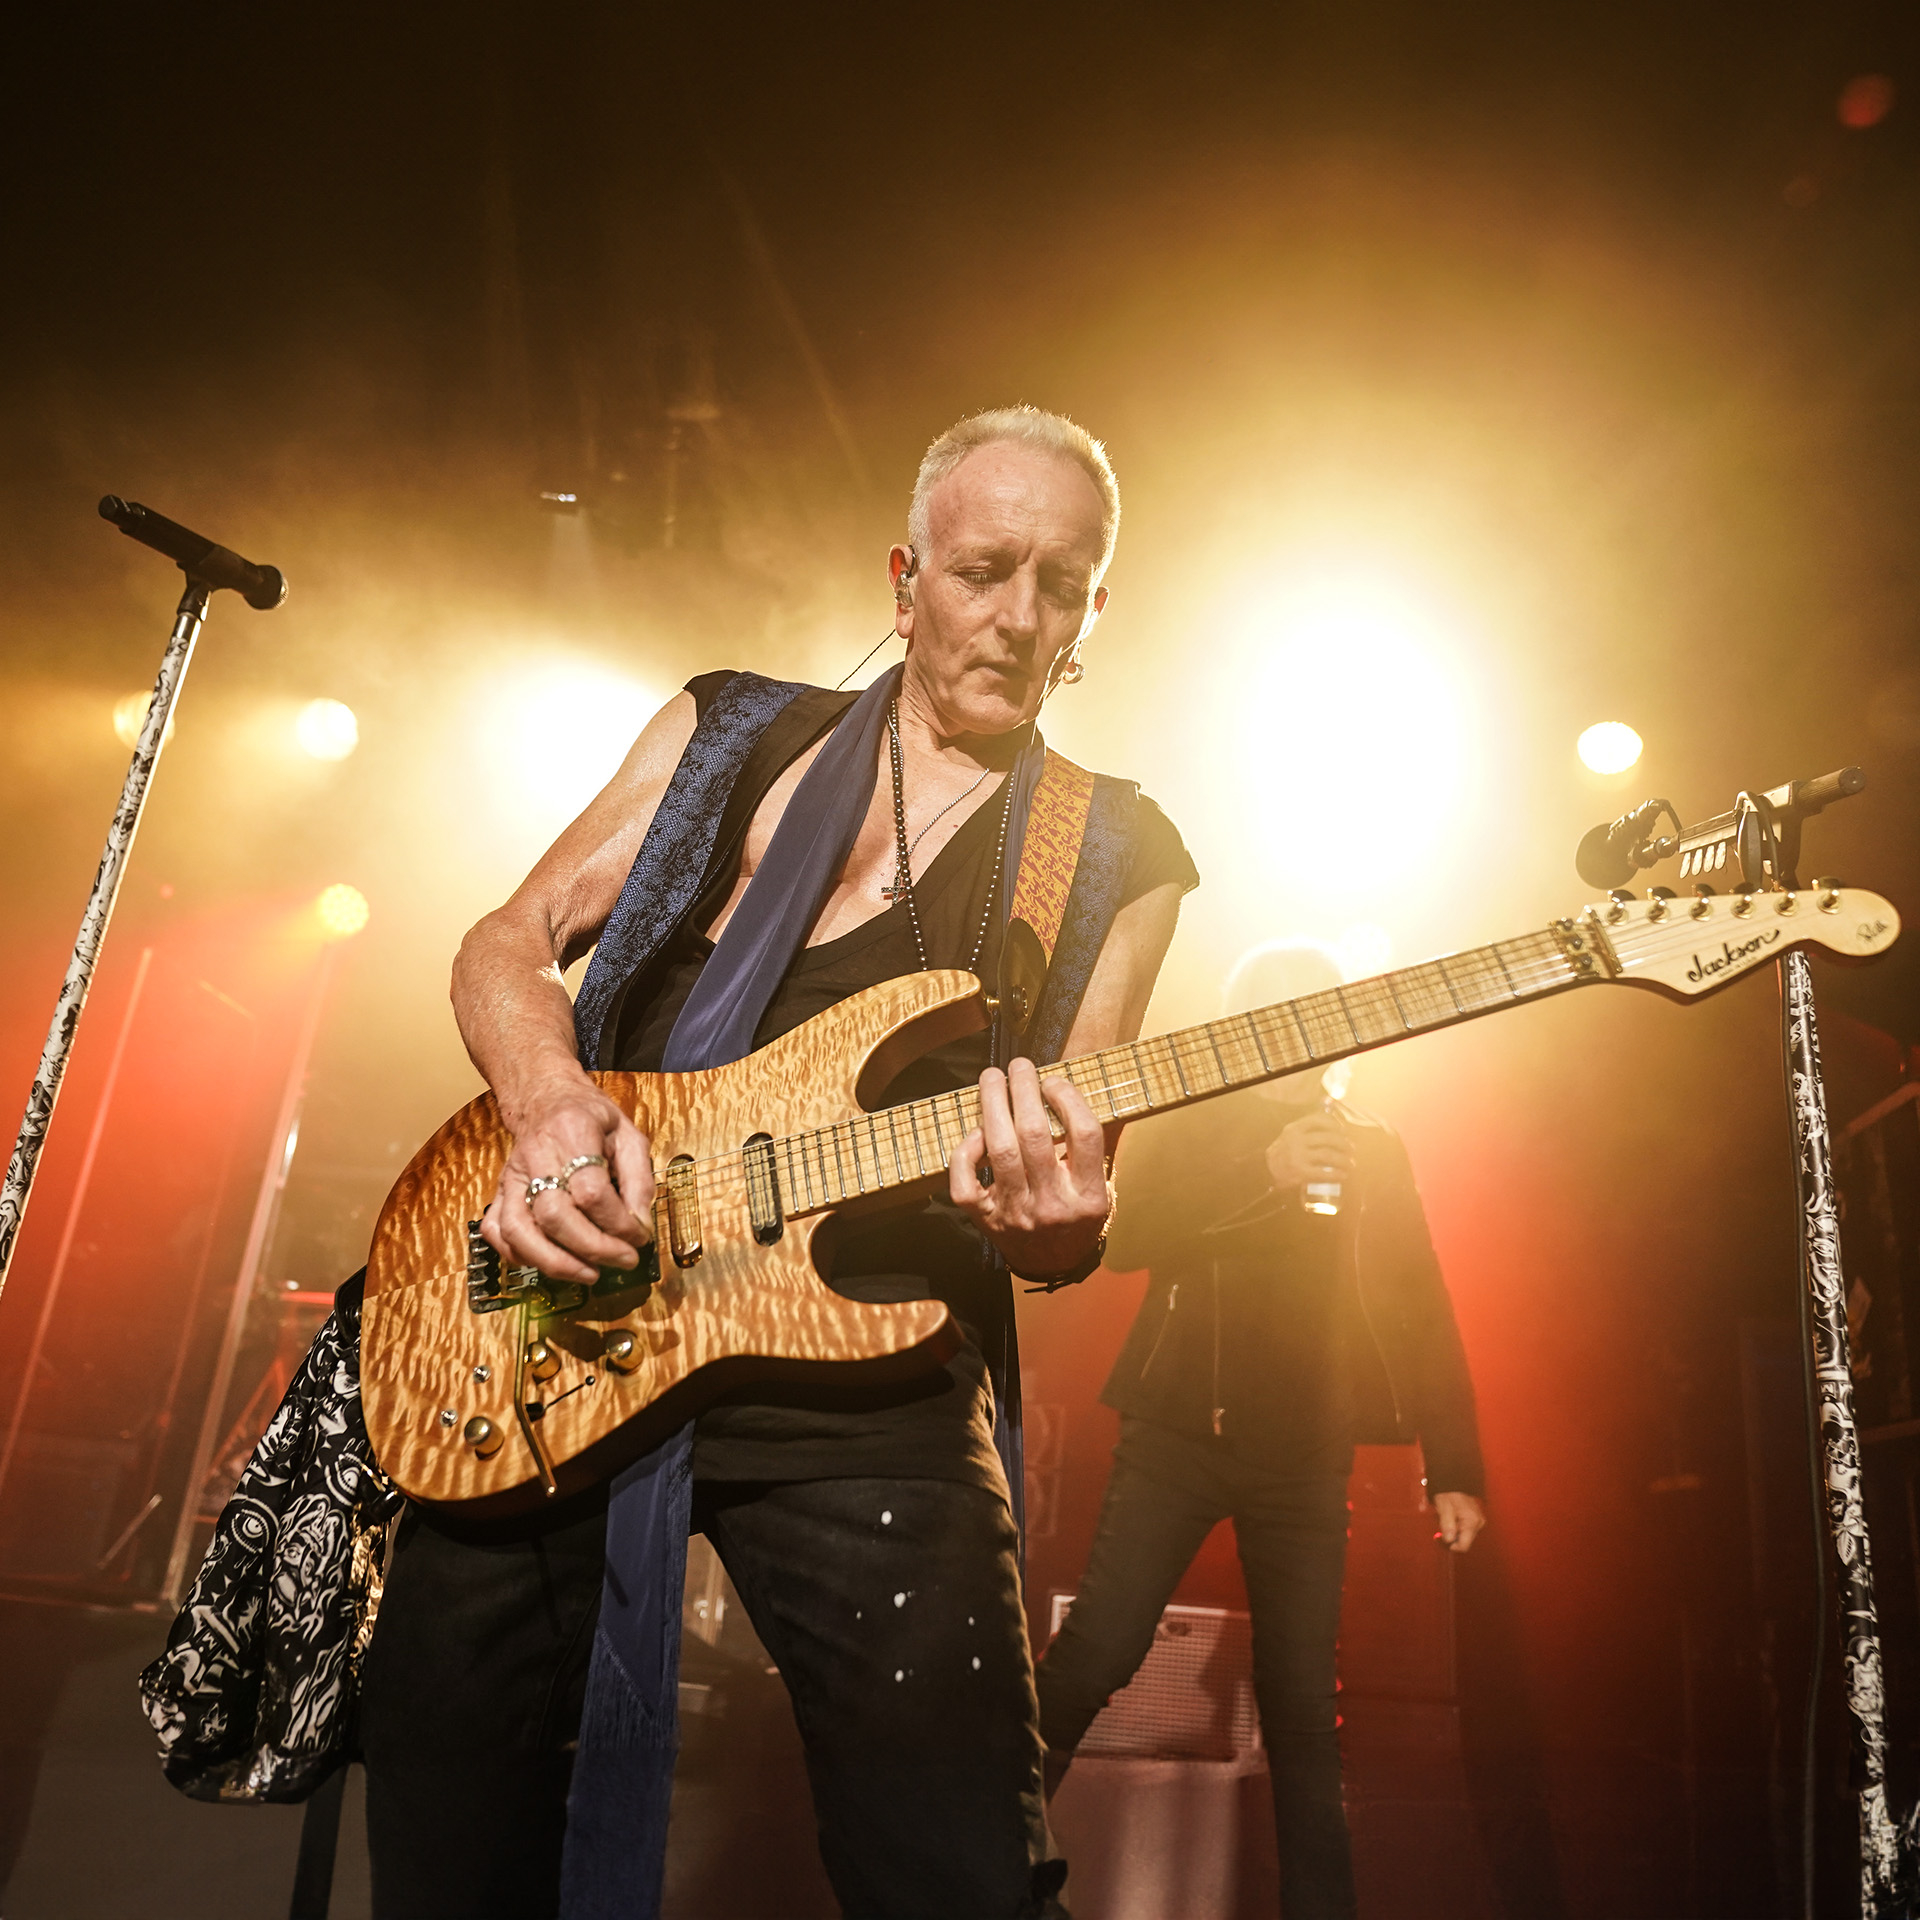 Def Leppard and Mötley Crüe Aus Tour: An Inside Look with Phil Collen